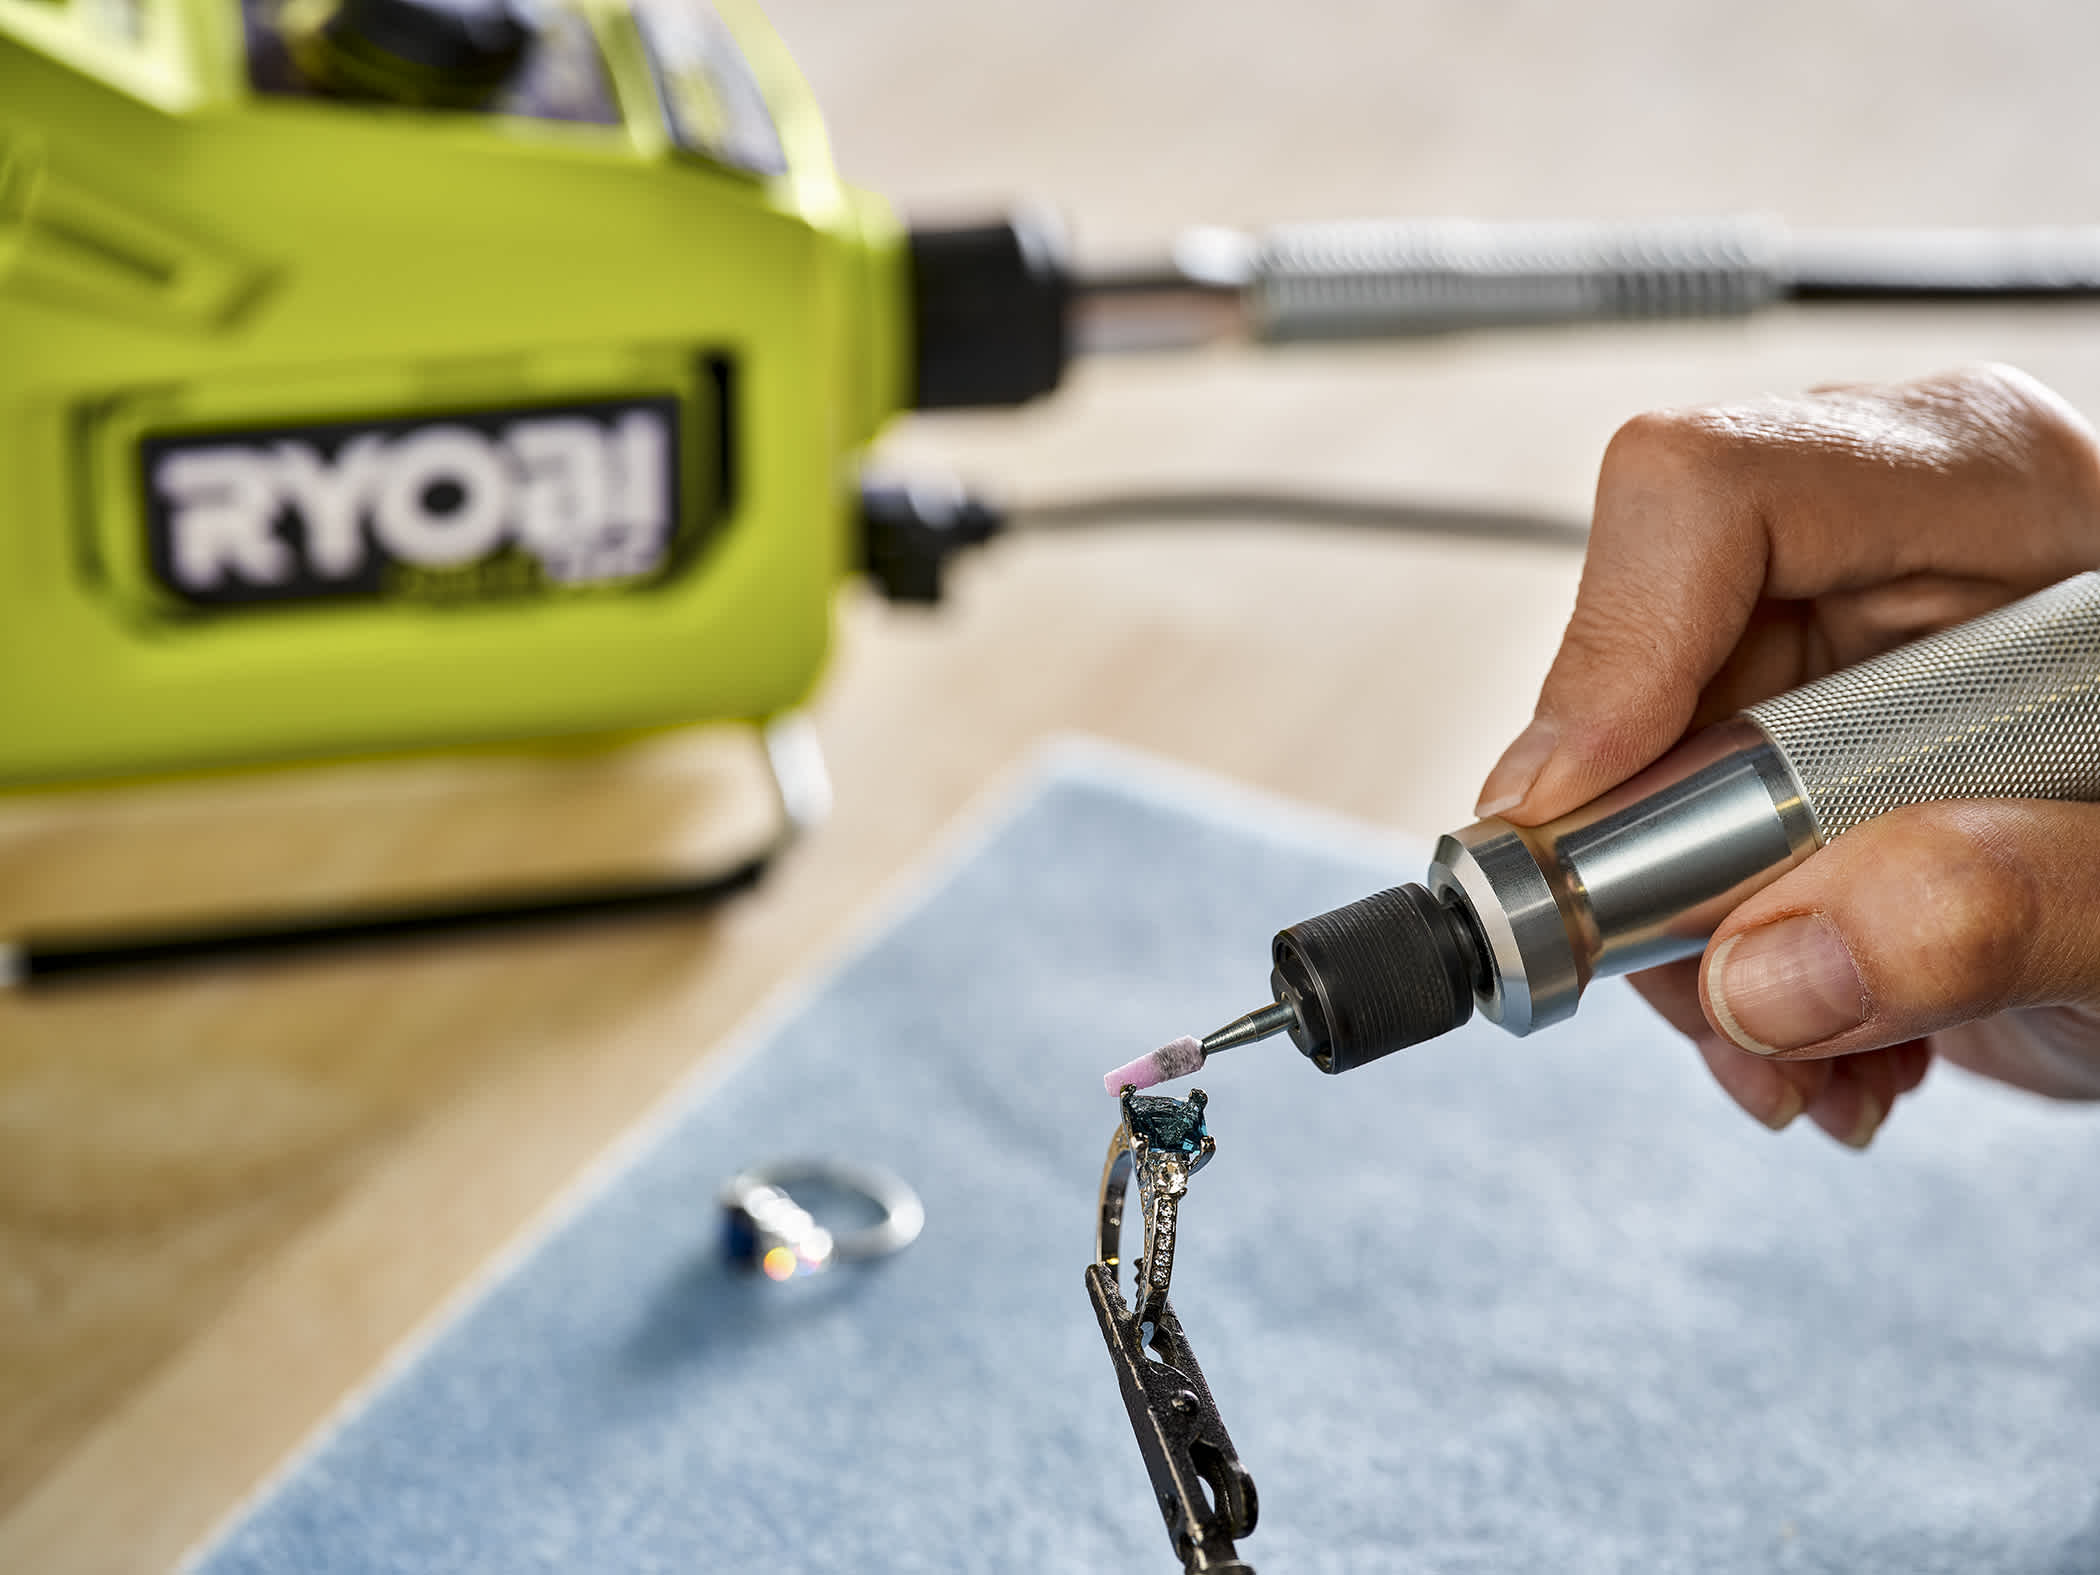 Product Features Image for 18V ONE+ HP BRUSHLESS CORDLESS ROTARY TOOL.